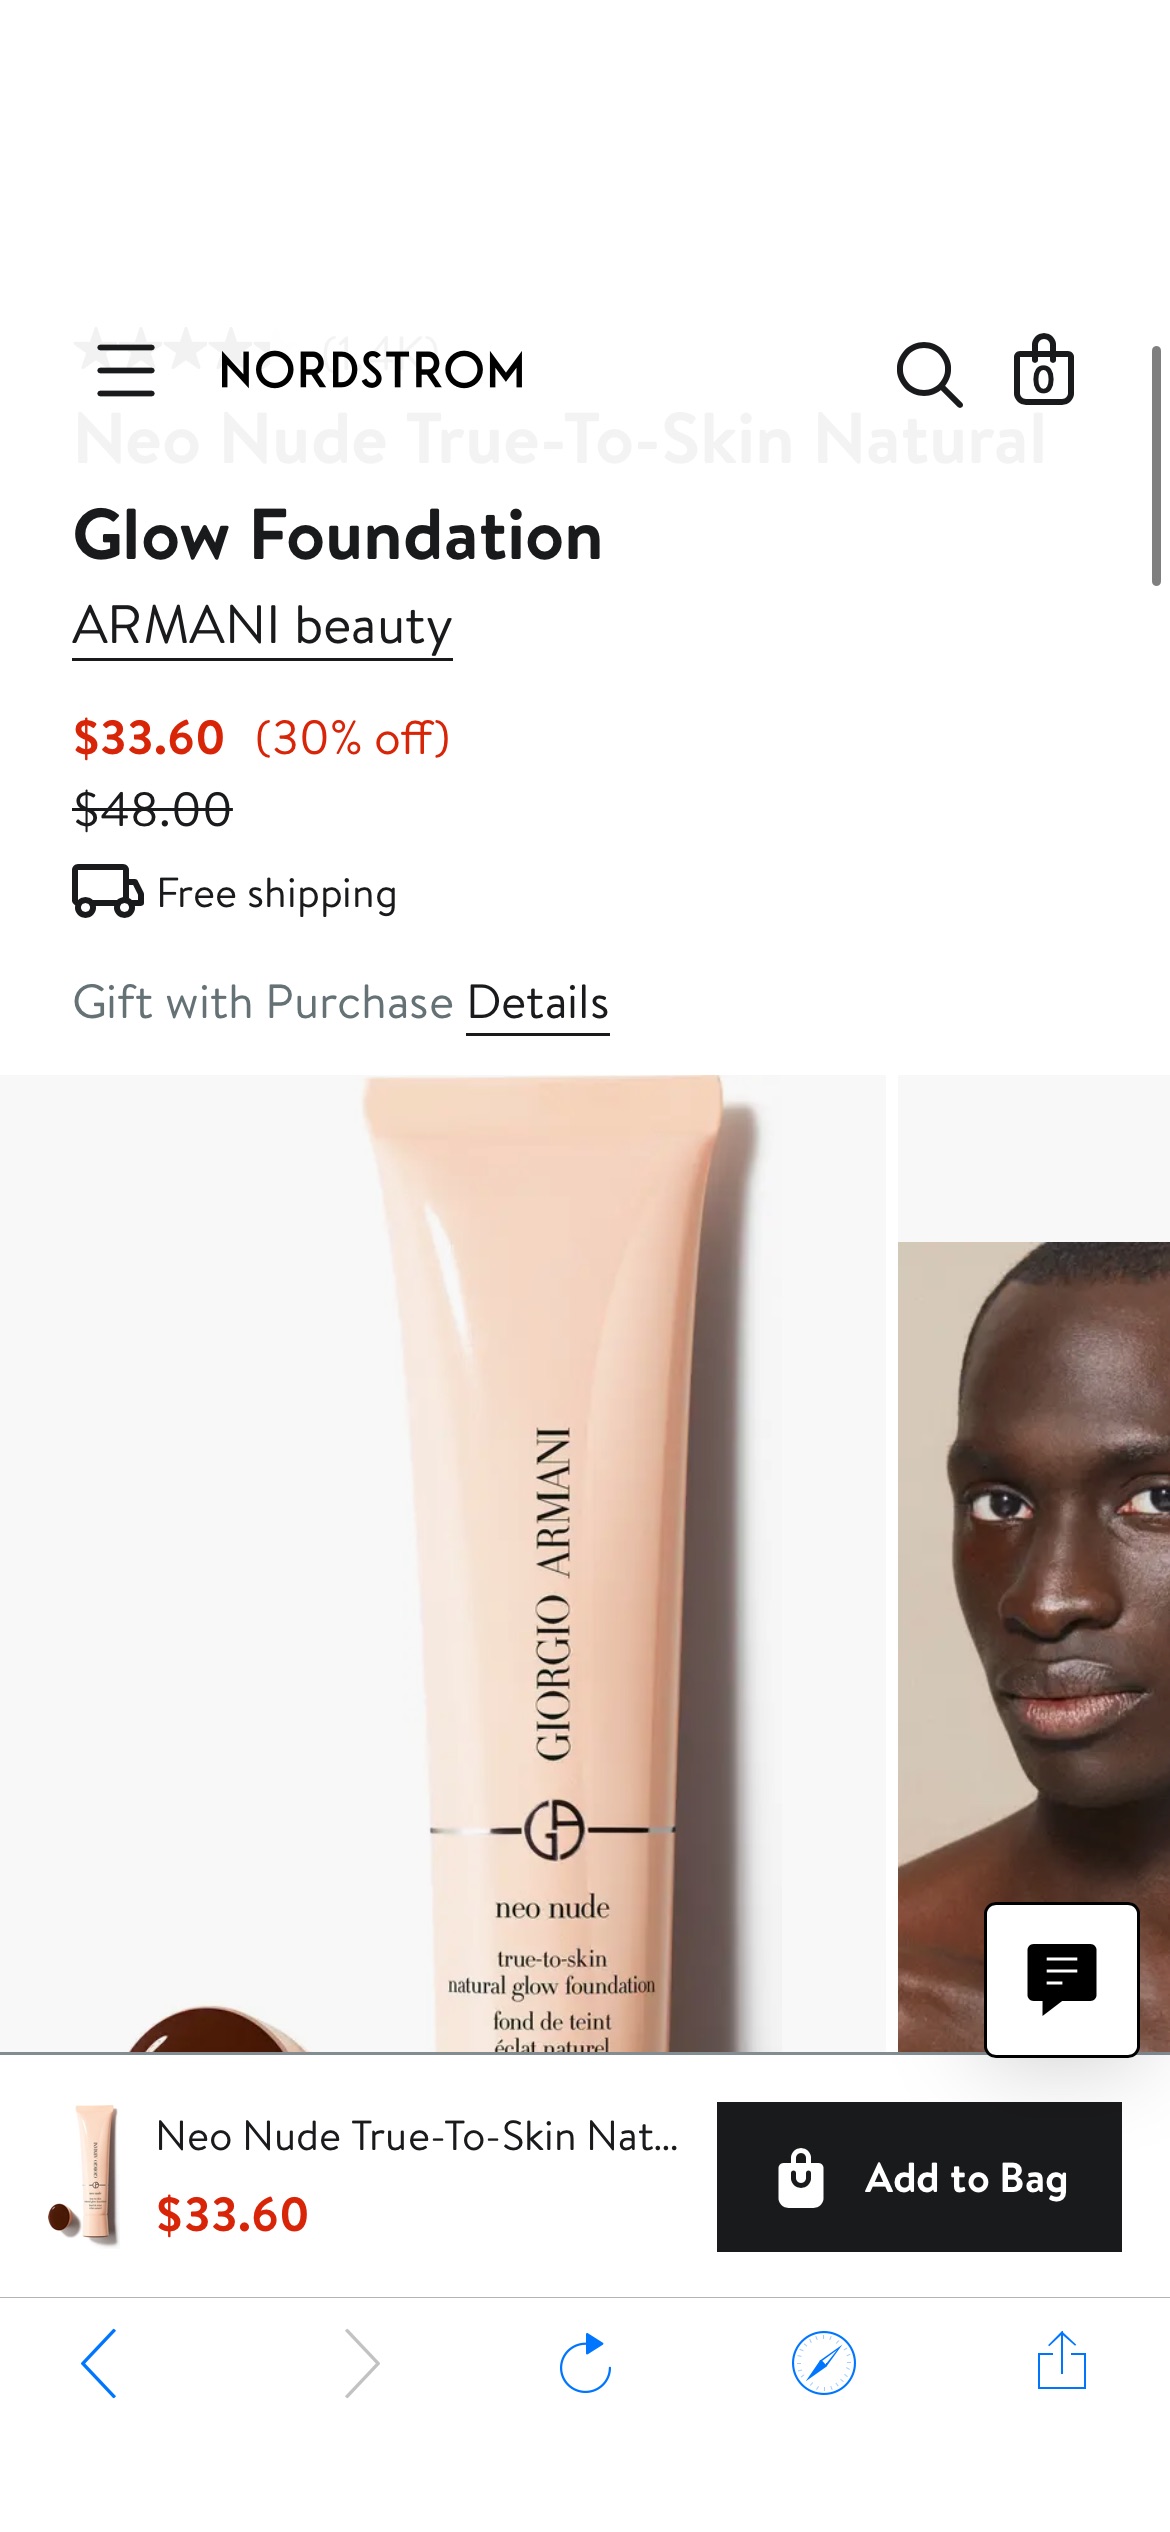 ARMANI beauty Neo Nude True-To-Skin Natural Glow Foundation | Nordstrom